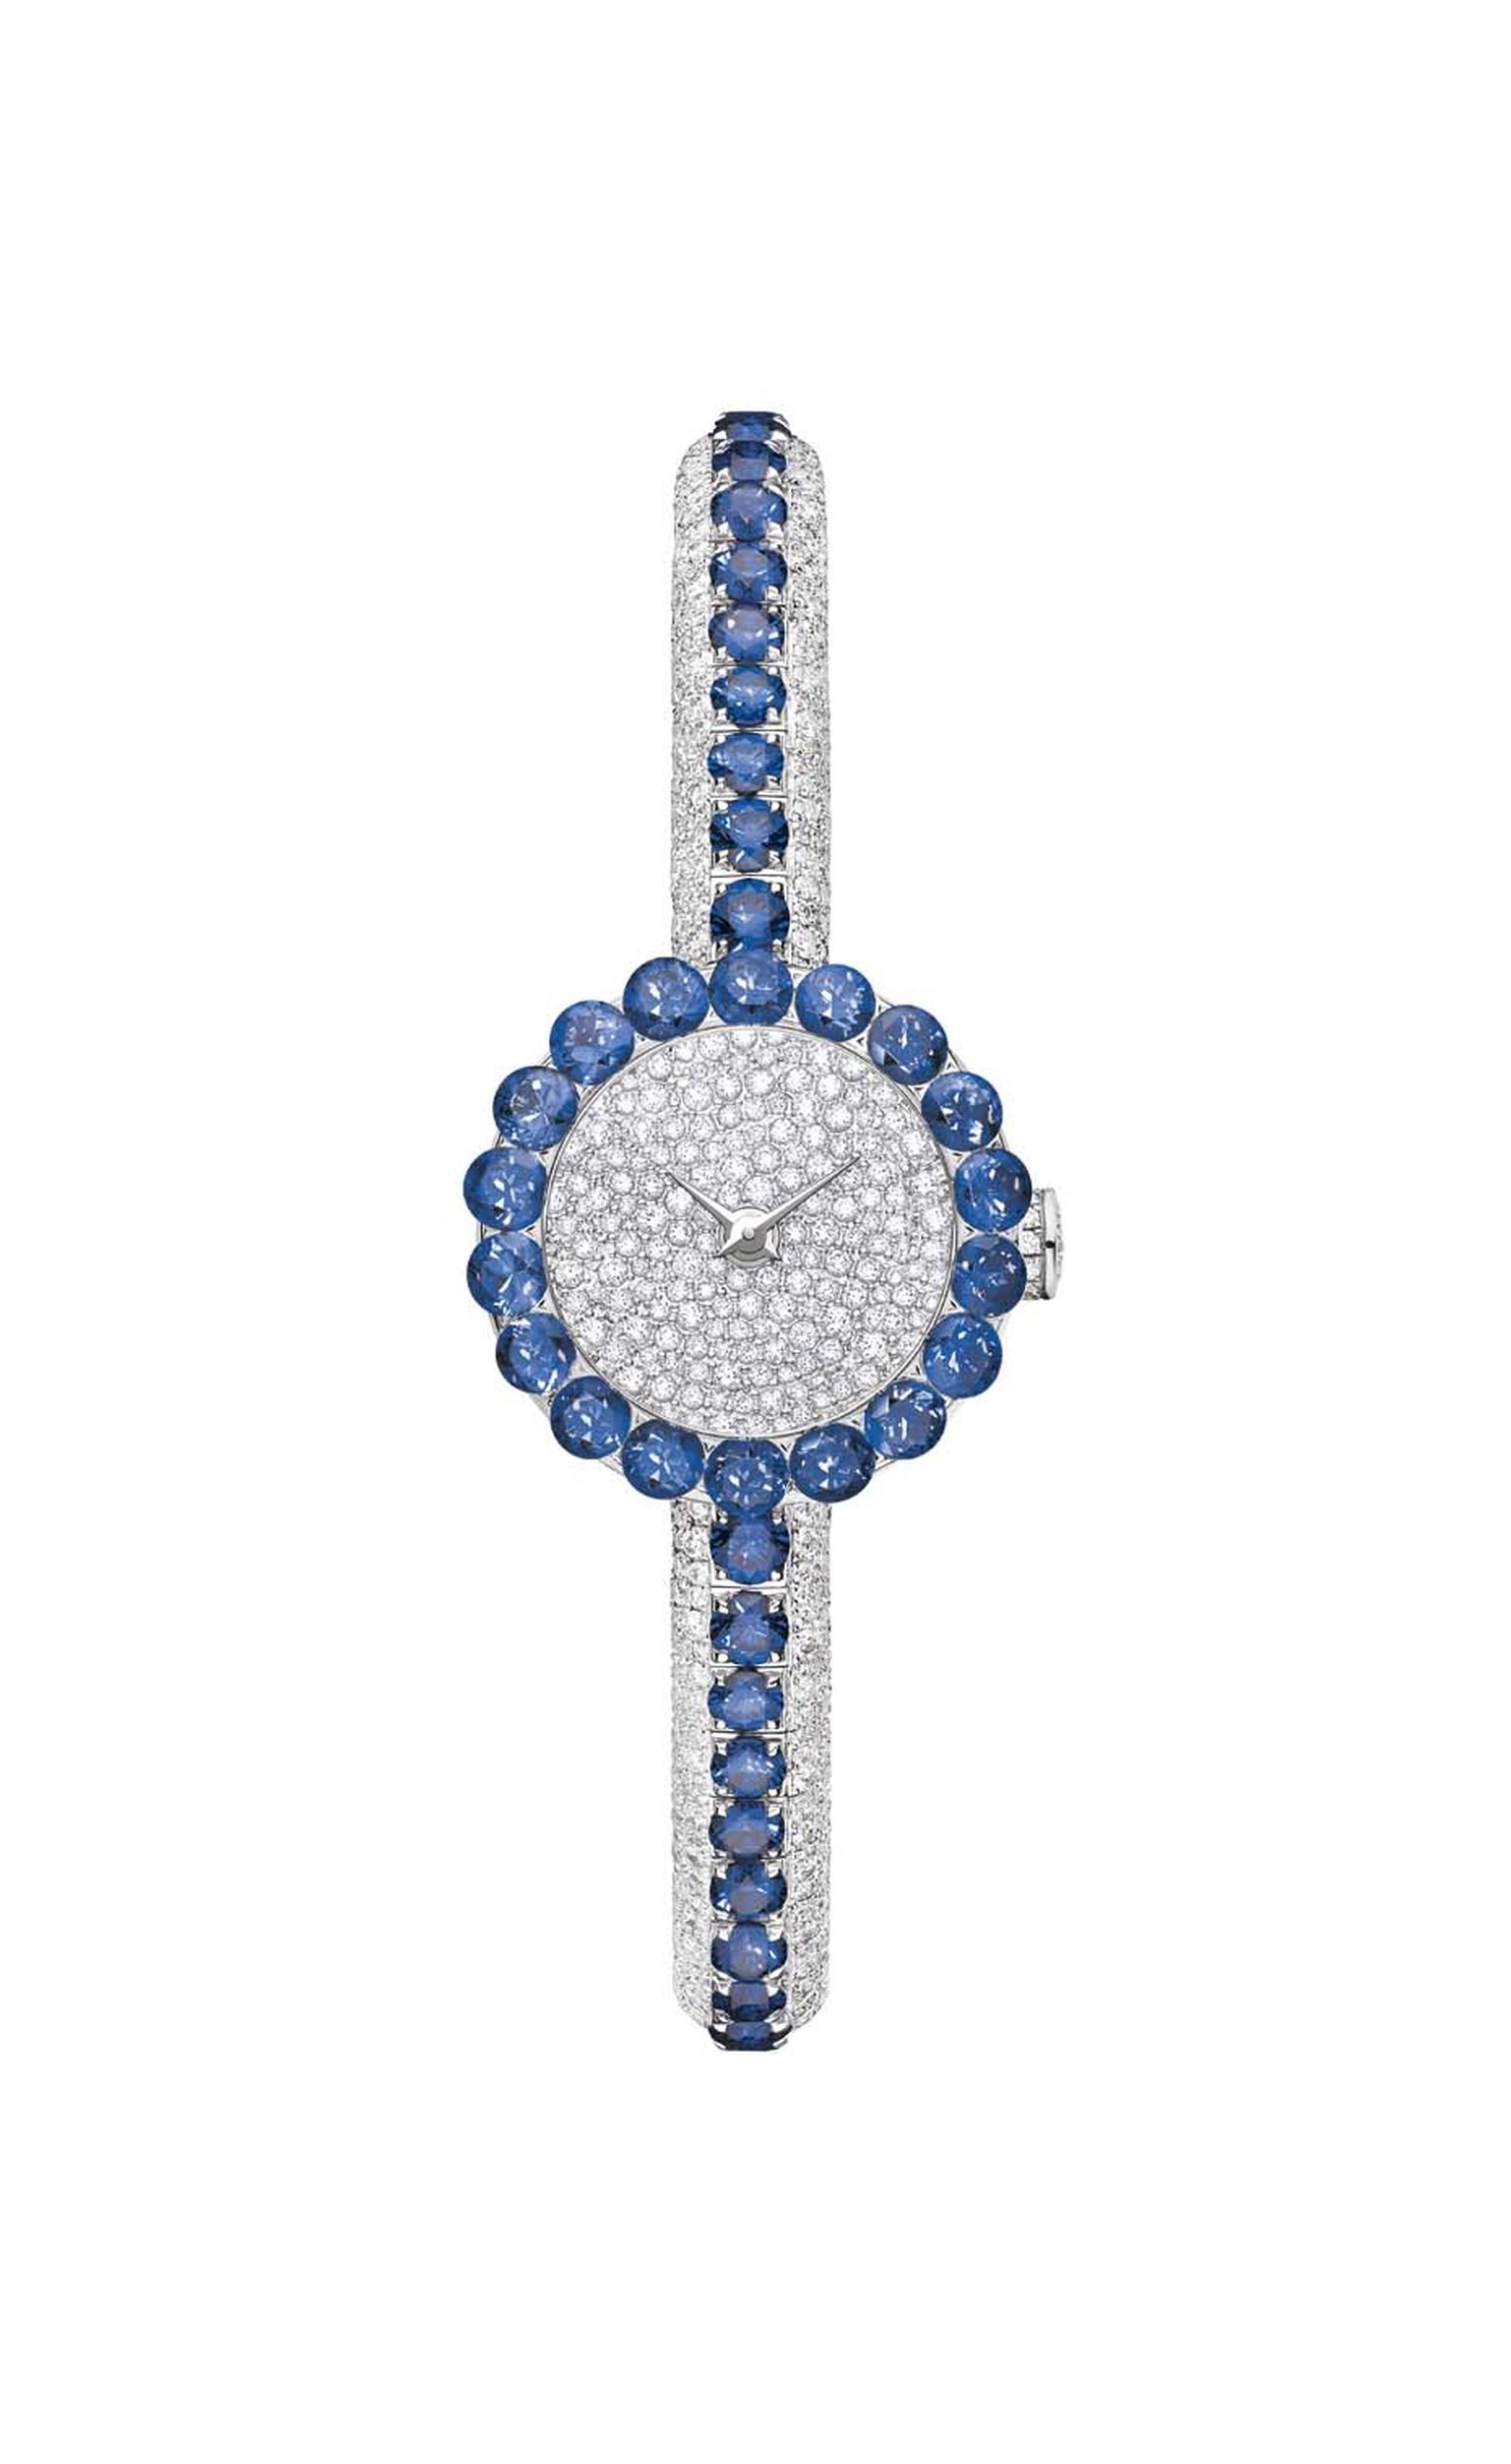 The Dior La D de Dior Précieuse high jewellery watch features 65 sapphires arching across the bracelet and circling the bezel, set into a bed of 999 snow-set diamonds.